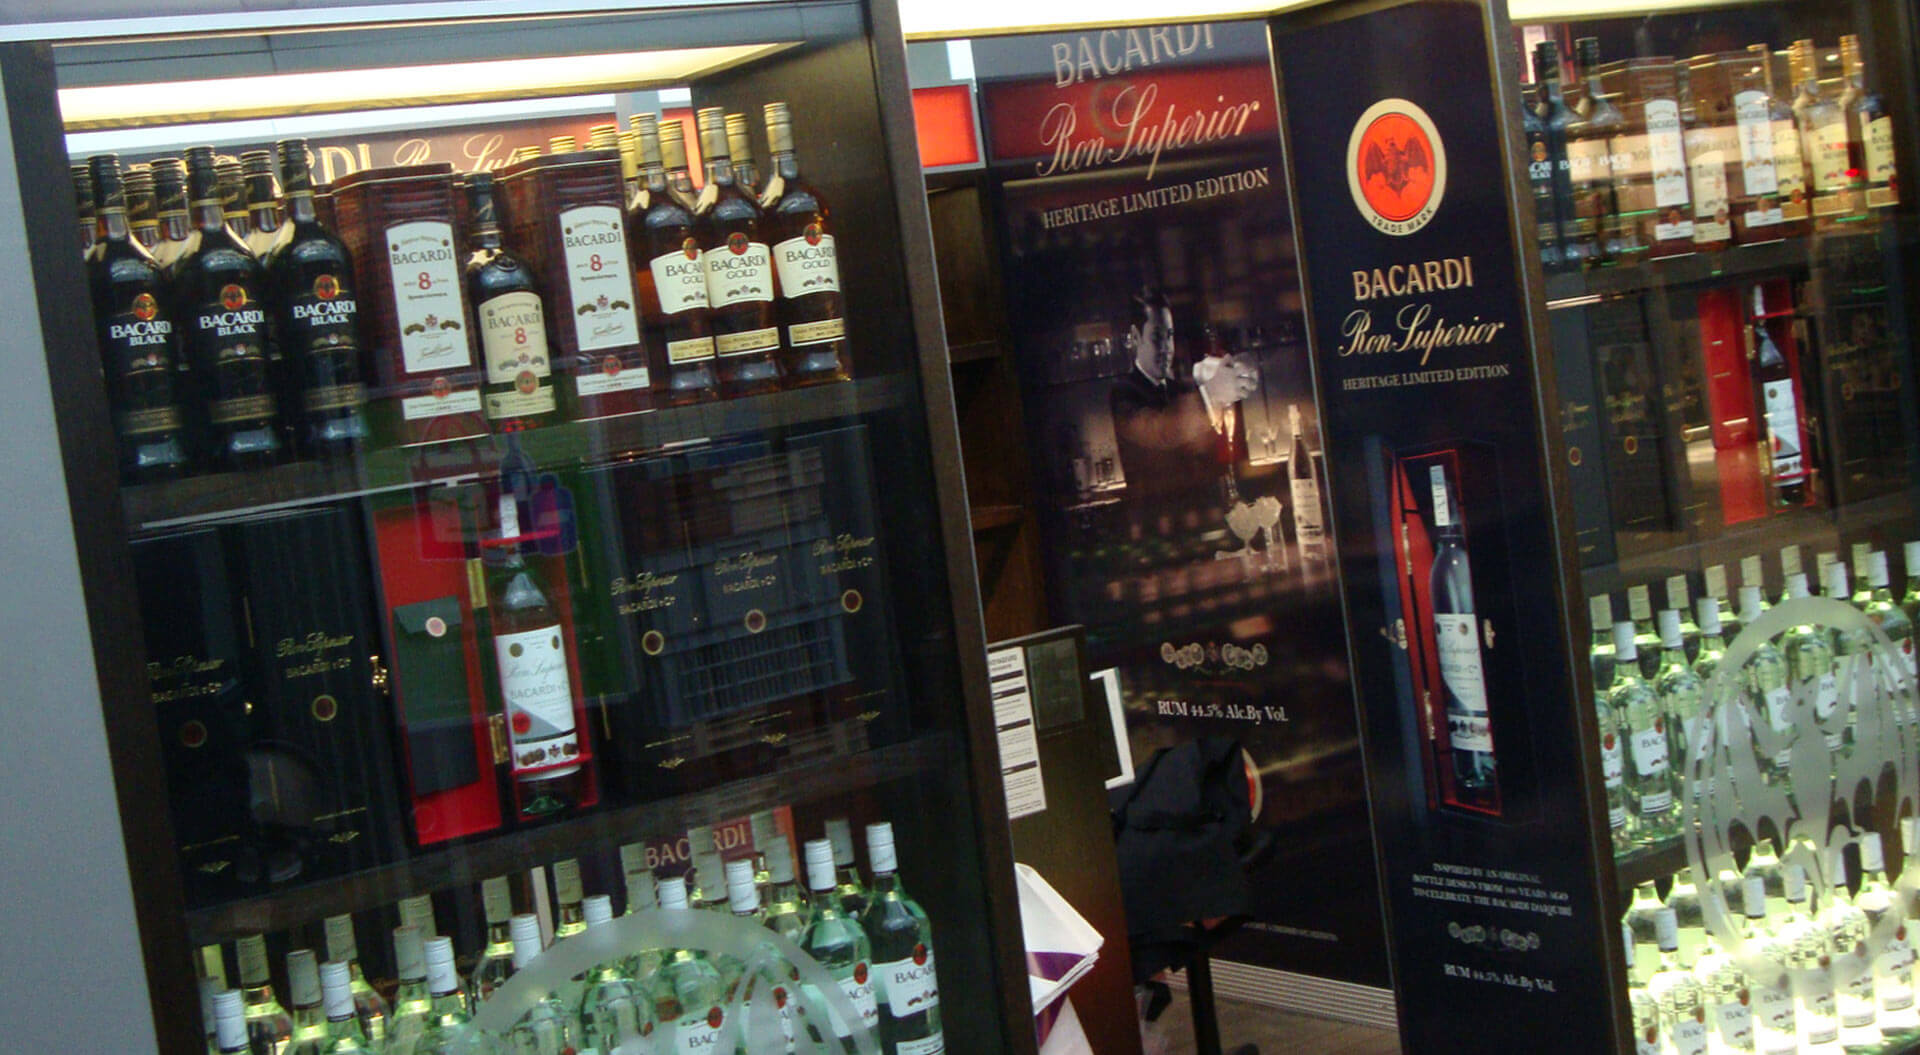 Bacardi Heritage Ron Superior Limited Edition brand activation store design at Charles de Gualle Airport